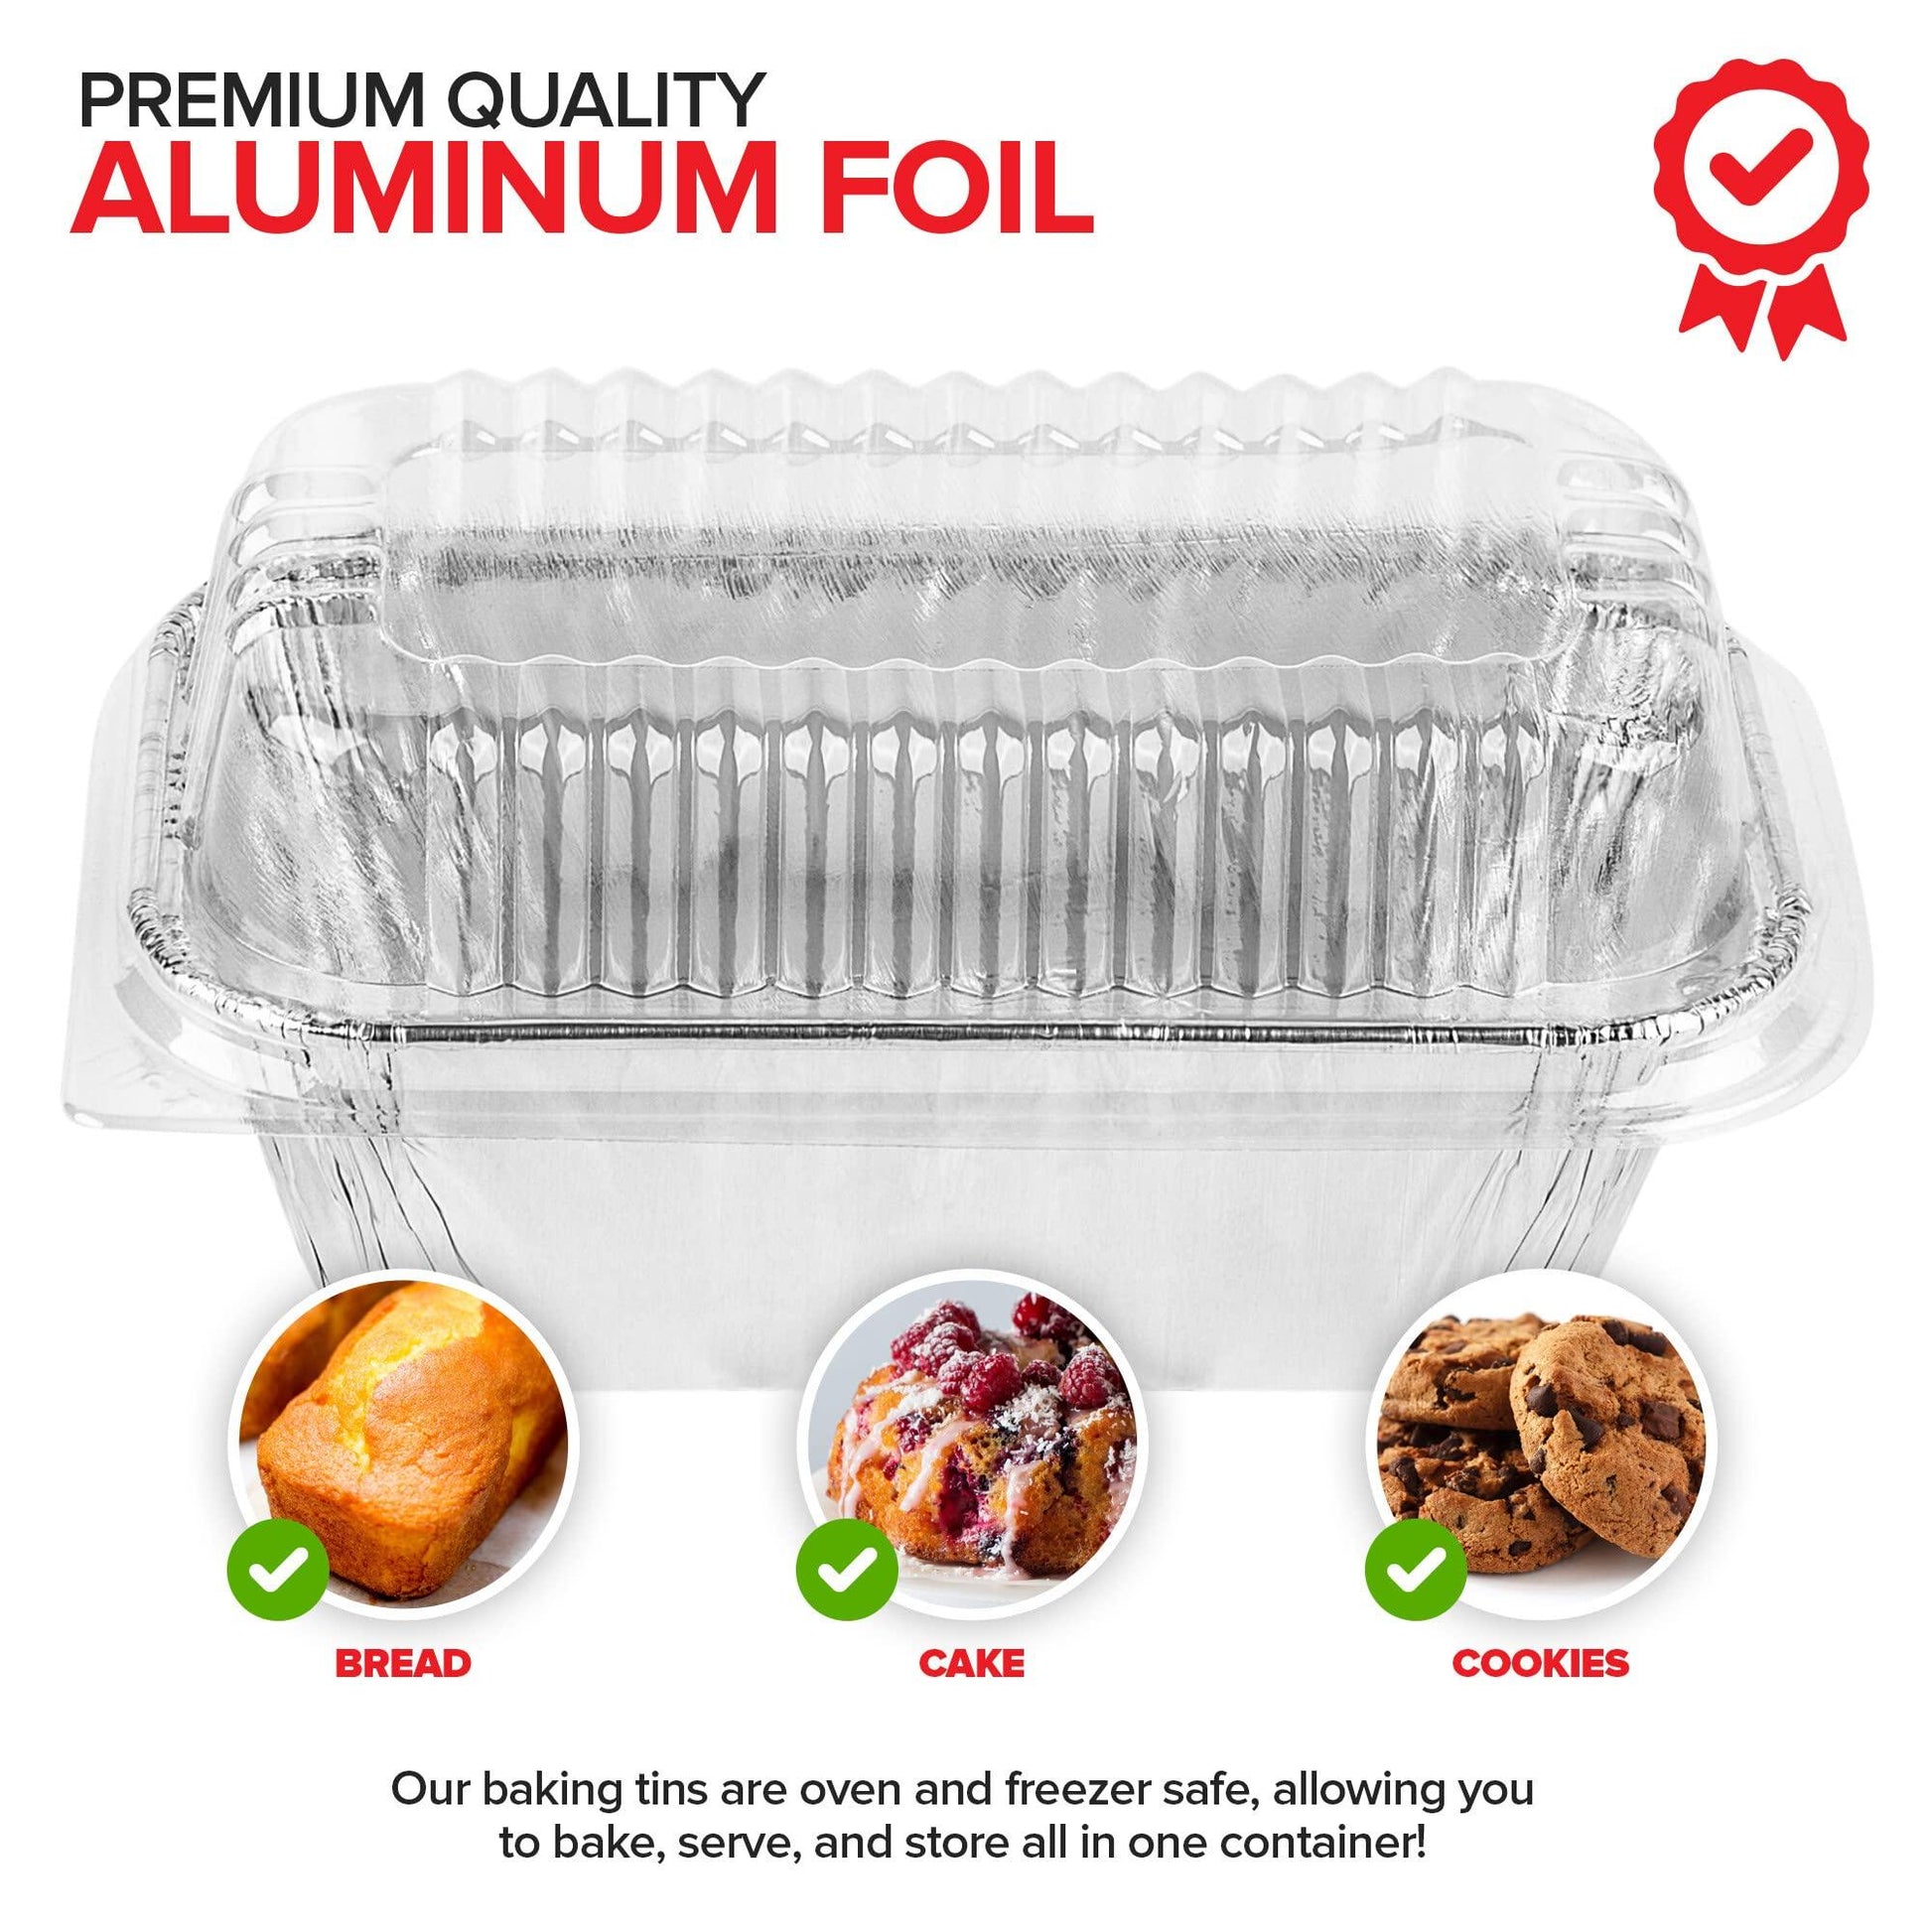 Stock Your Home Disposable Aluminum Mini Loaf Pans with Lids, 1 lb (50 Pack) New & Improved Plastic Dome Lid Foil Baking Tins, Tin Pans for Cake, Bread, Holiday Baked Goods Packaging - CookCave